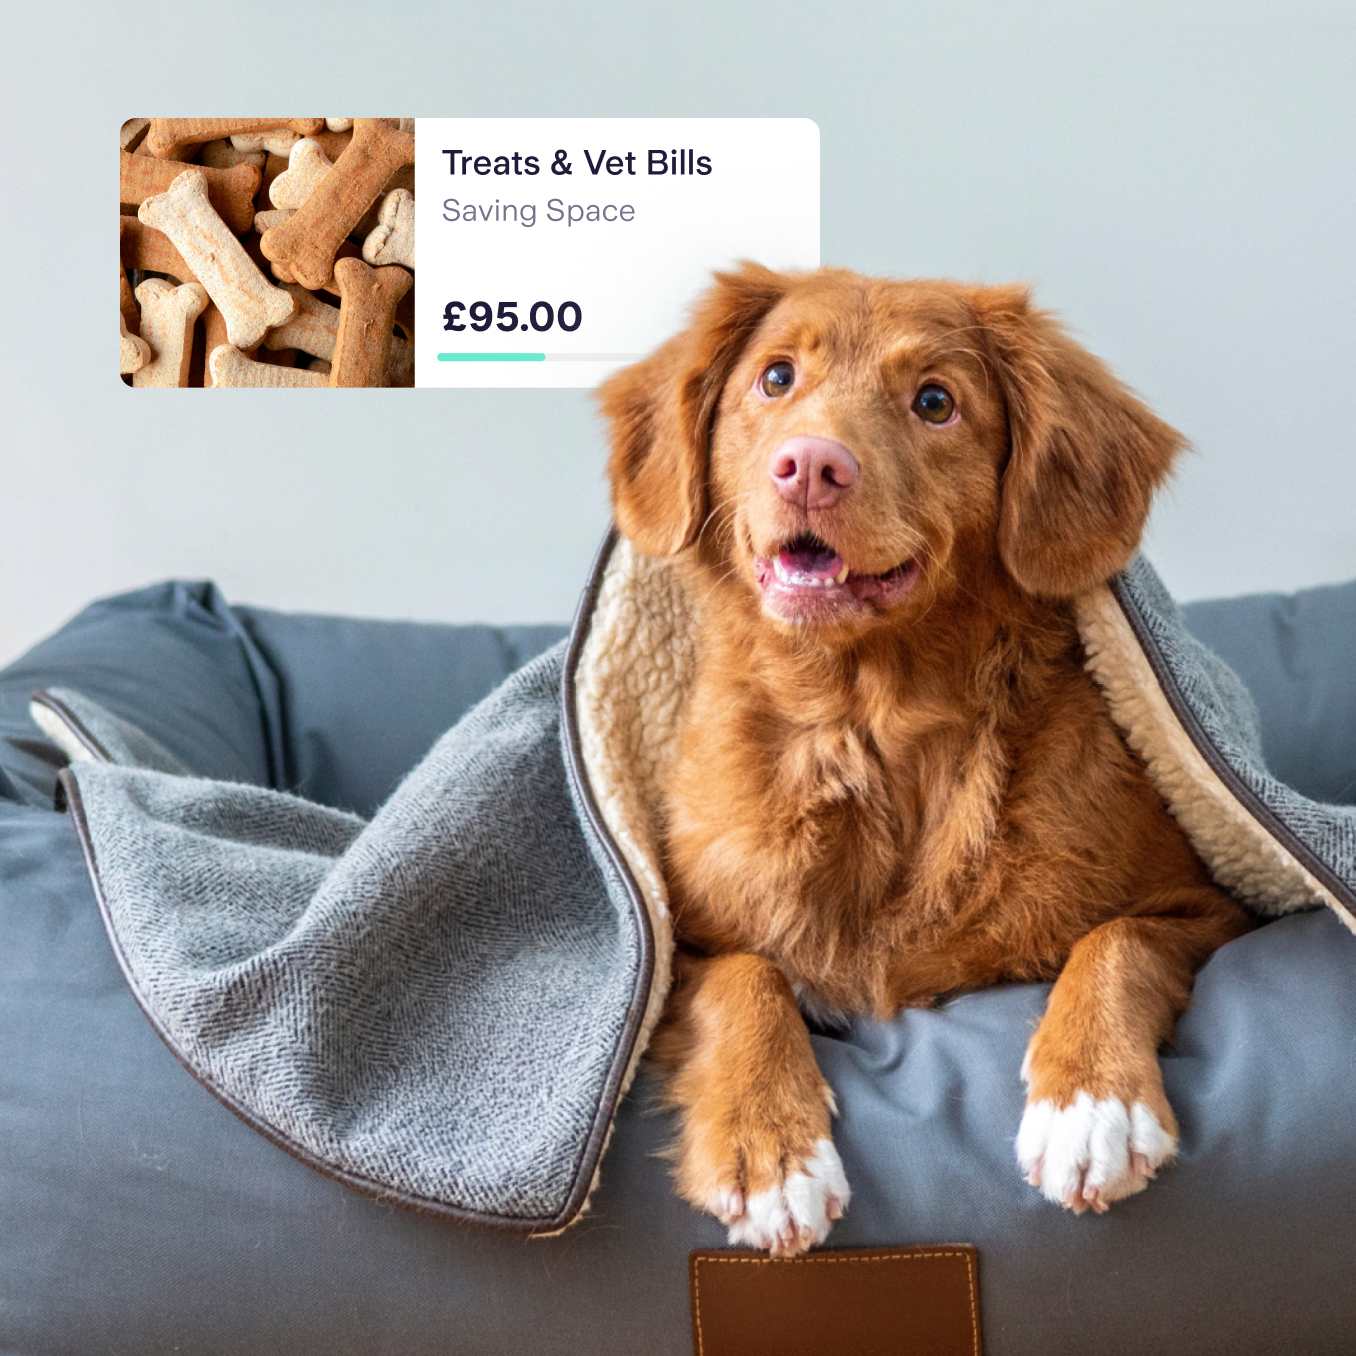 A dog covered with a blanket in the forground, with a screenshot of a 'Treats & vet Bills' saving space totalling £95